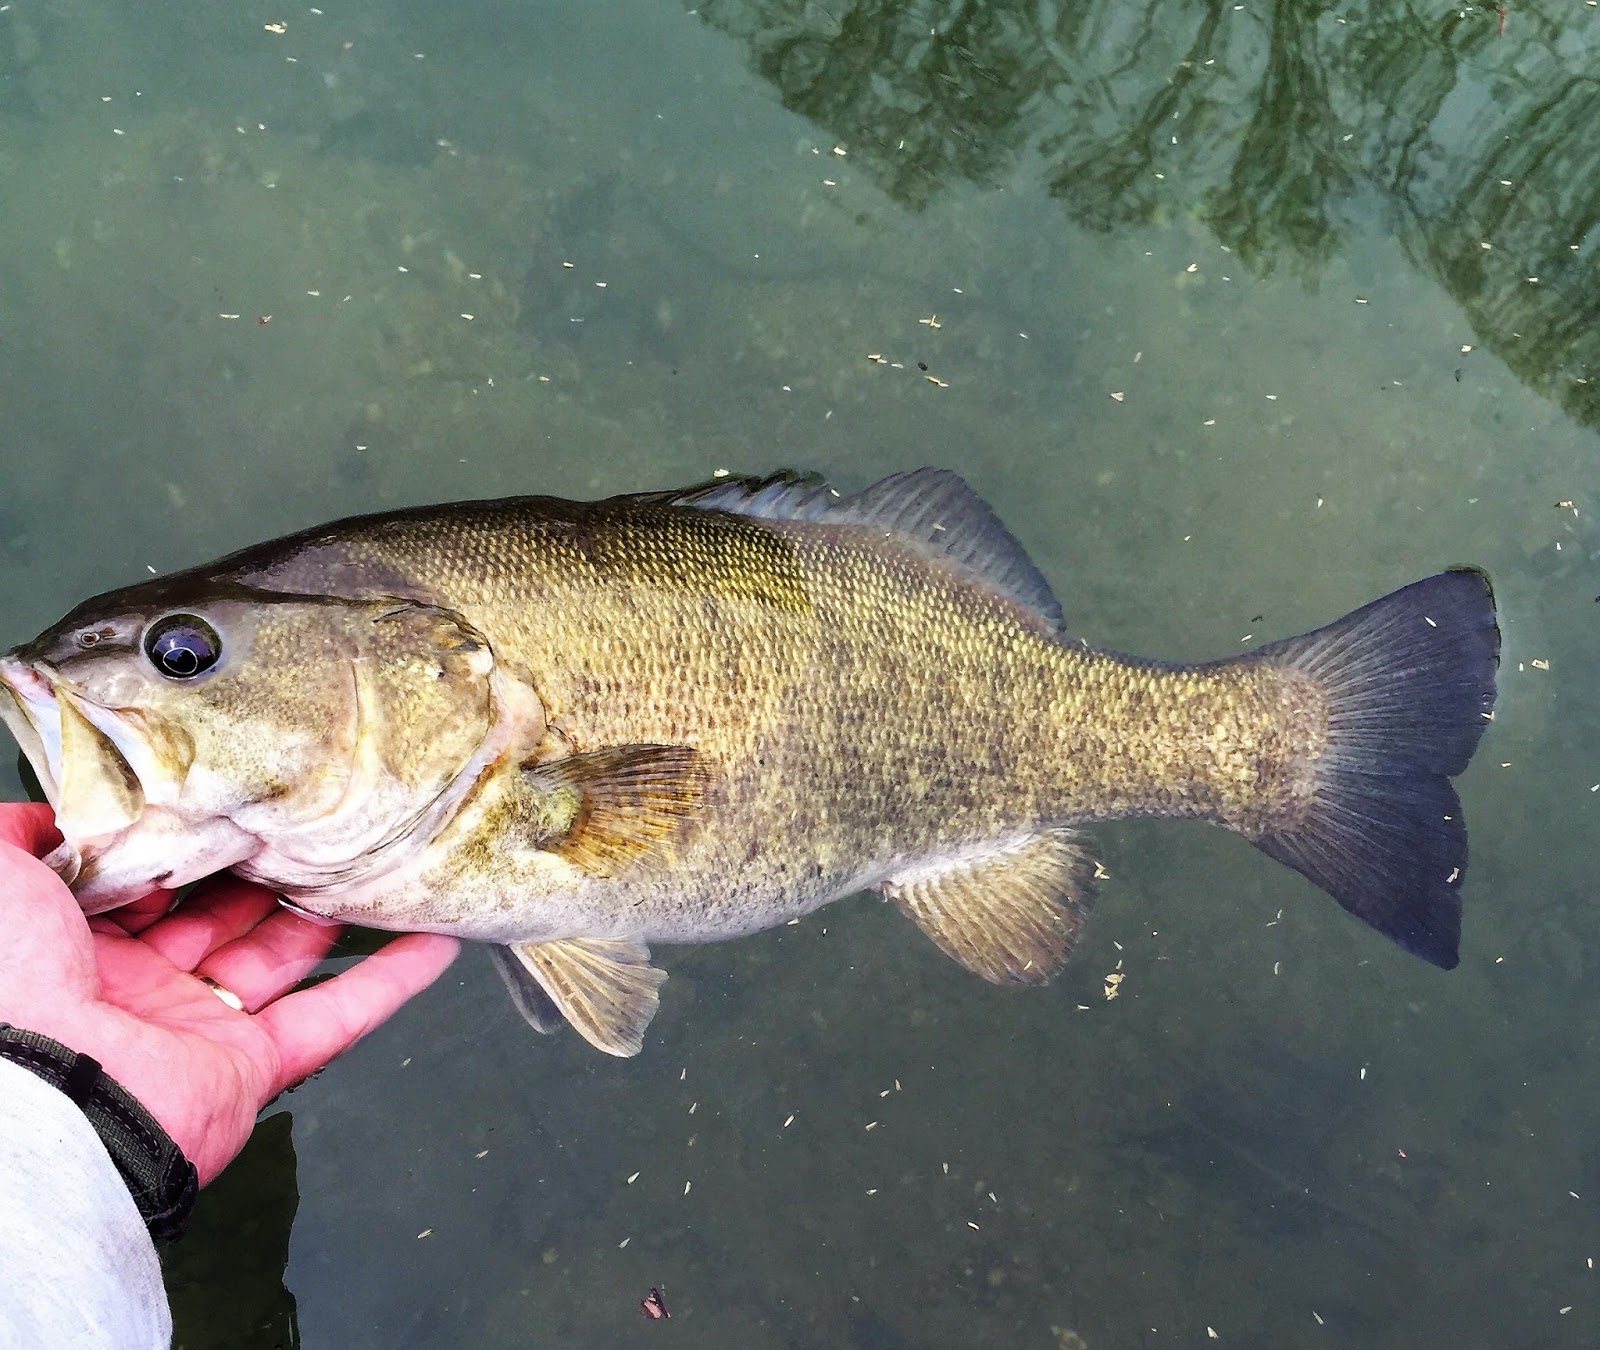 The Ozarks Smallmouth Alliance: Whats in a name?